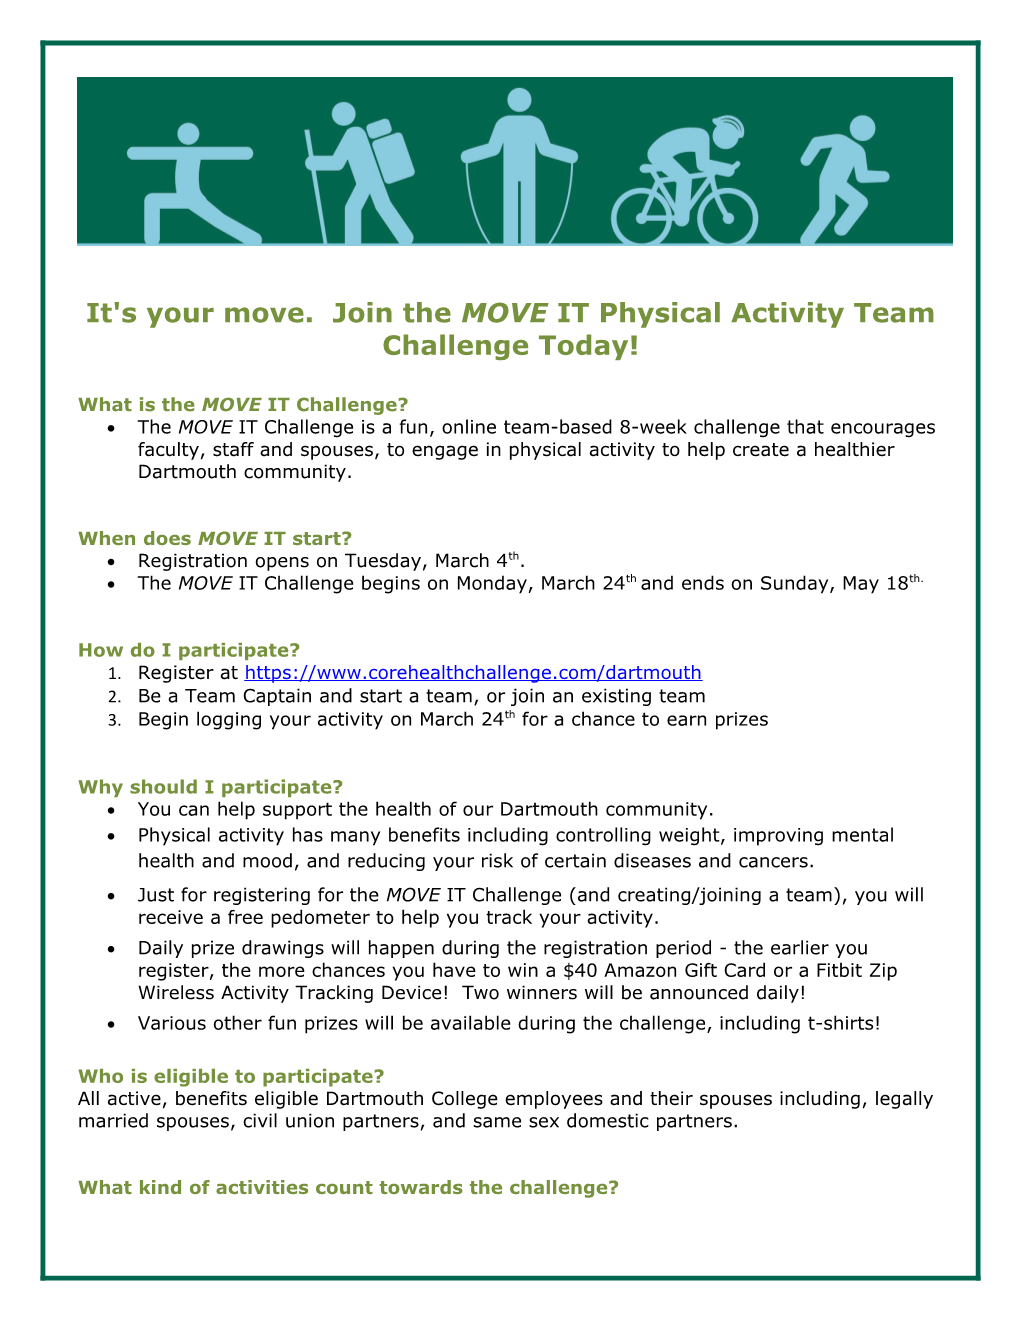 It's Your Move. Join the MOVE Itphysical Activity Team Challenge Today!